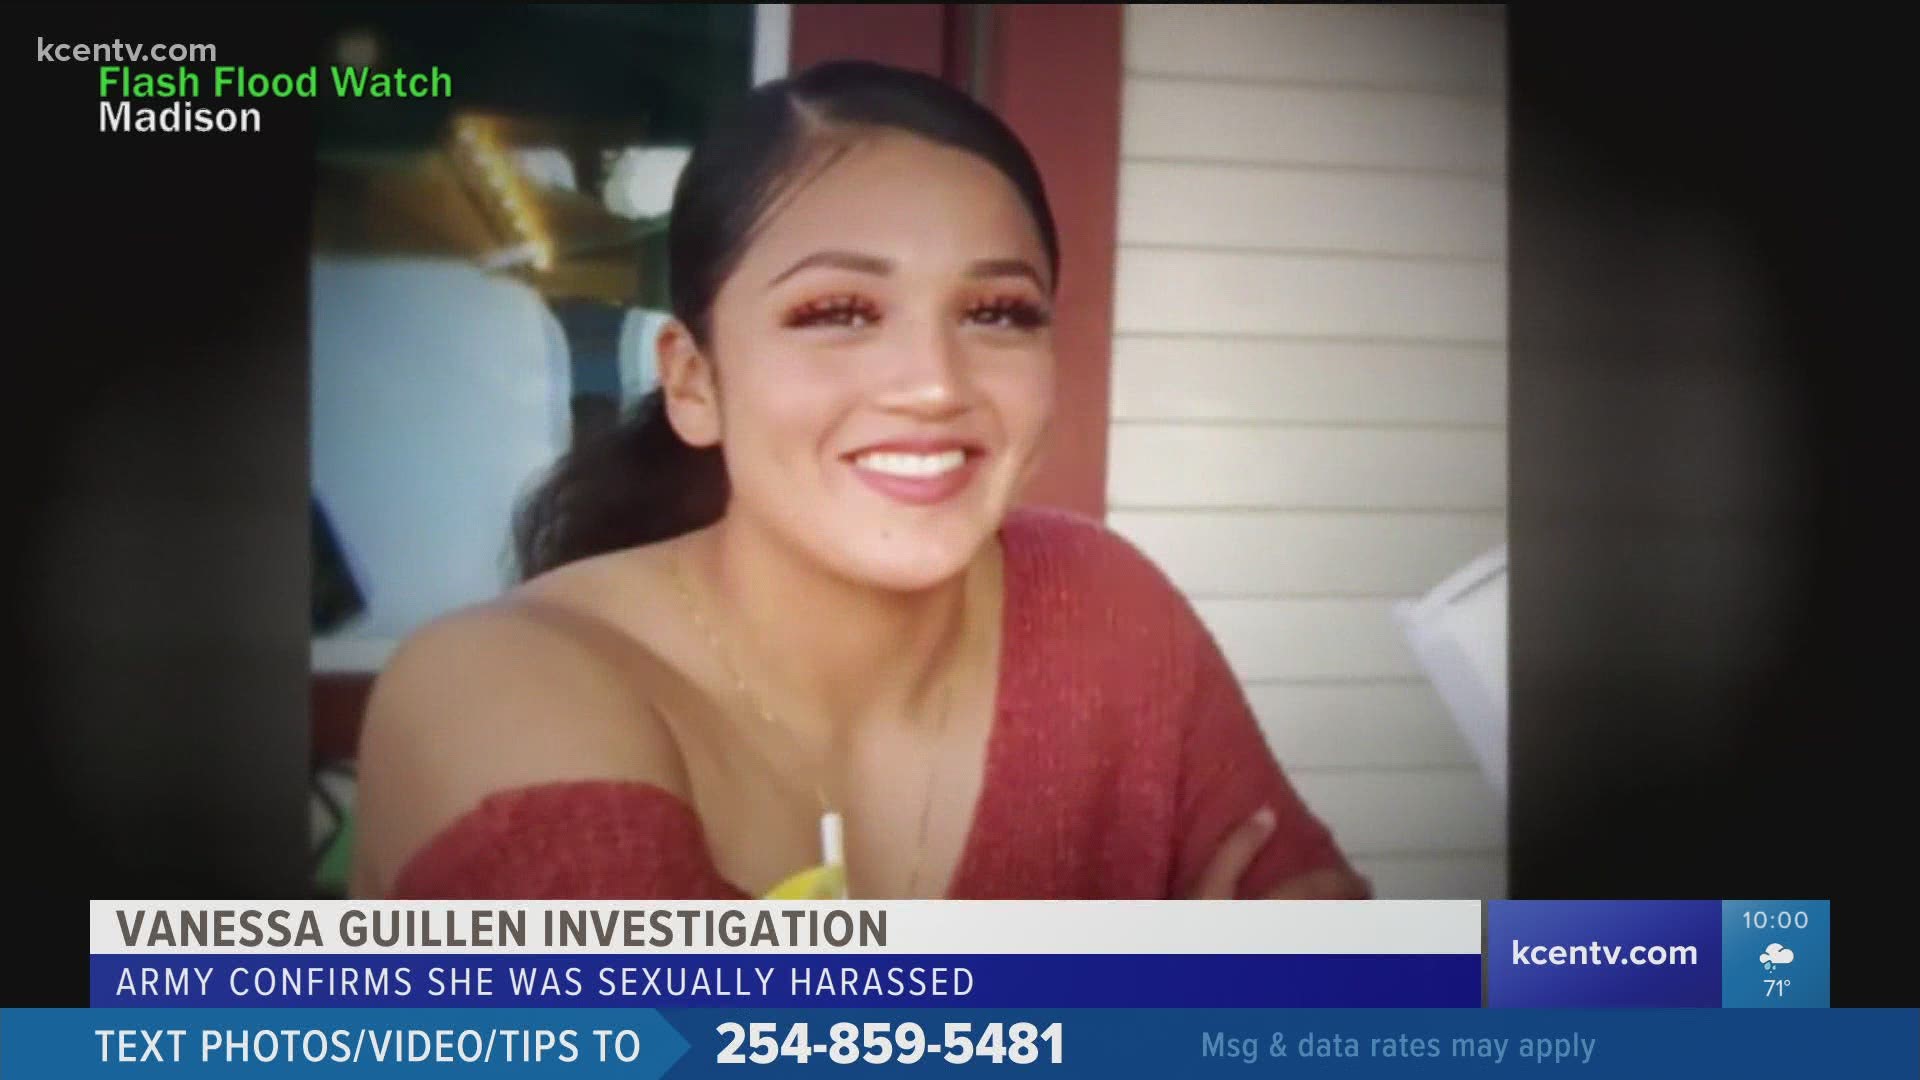 According to the findings, Guillen was sexually harassed twice -- at least once by her supervisor in late Summer 2019.